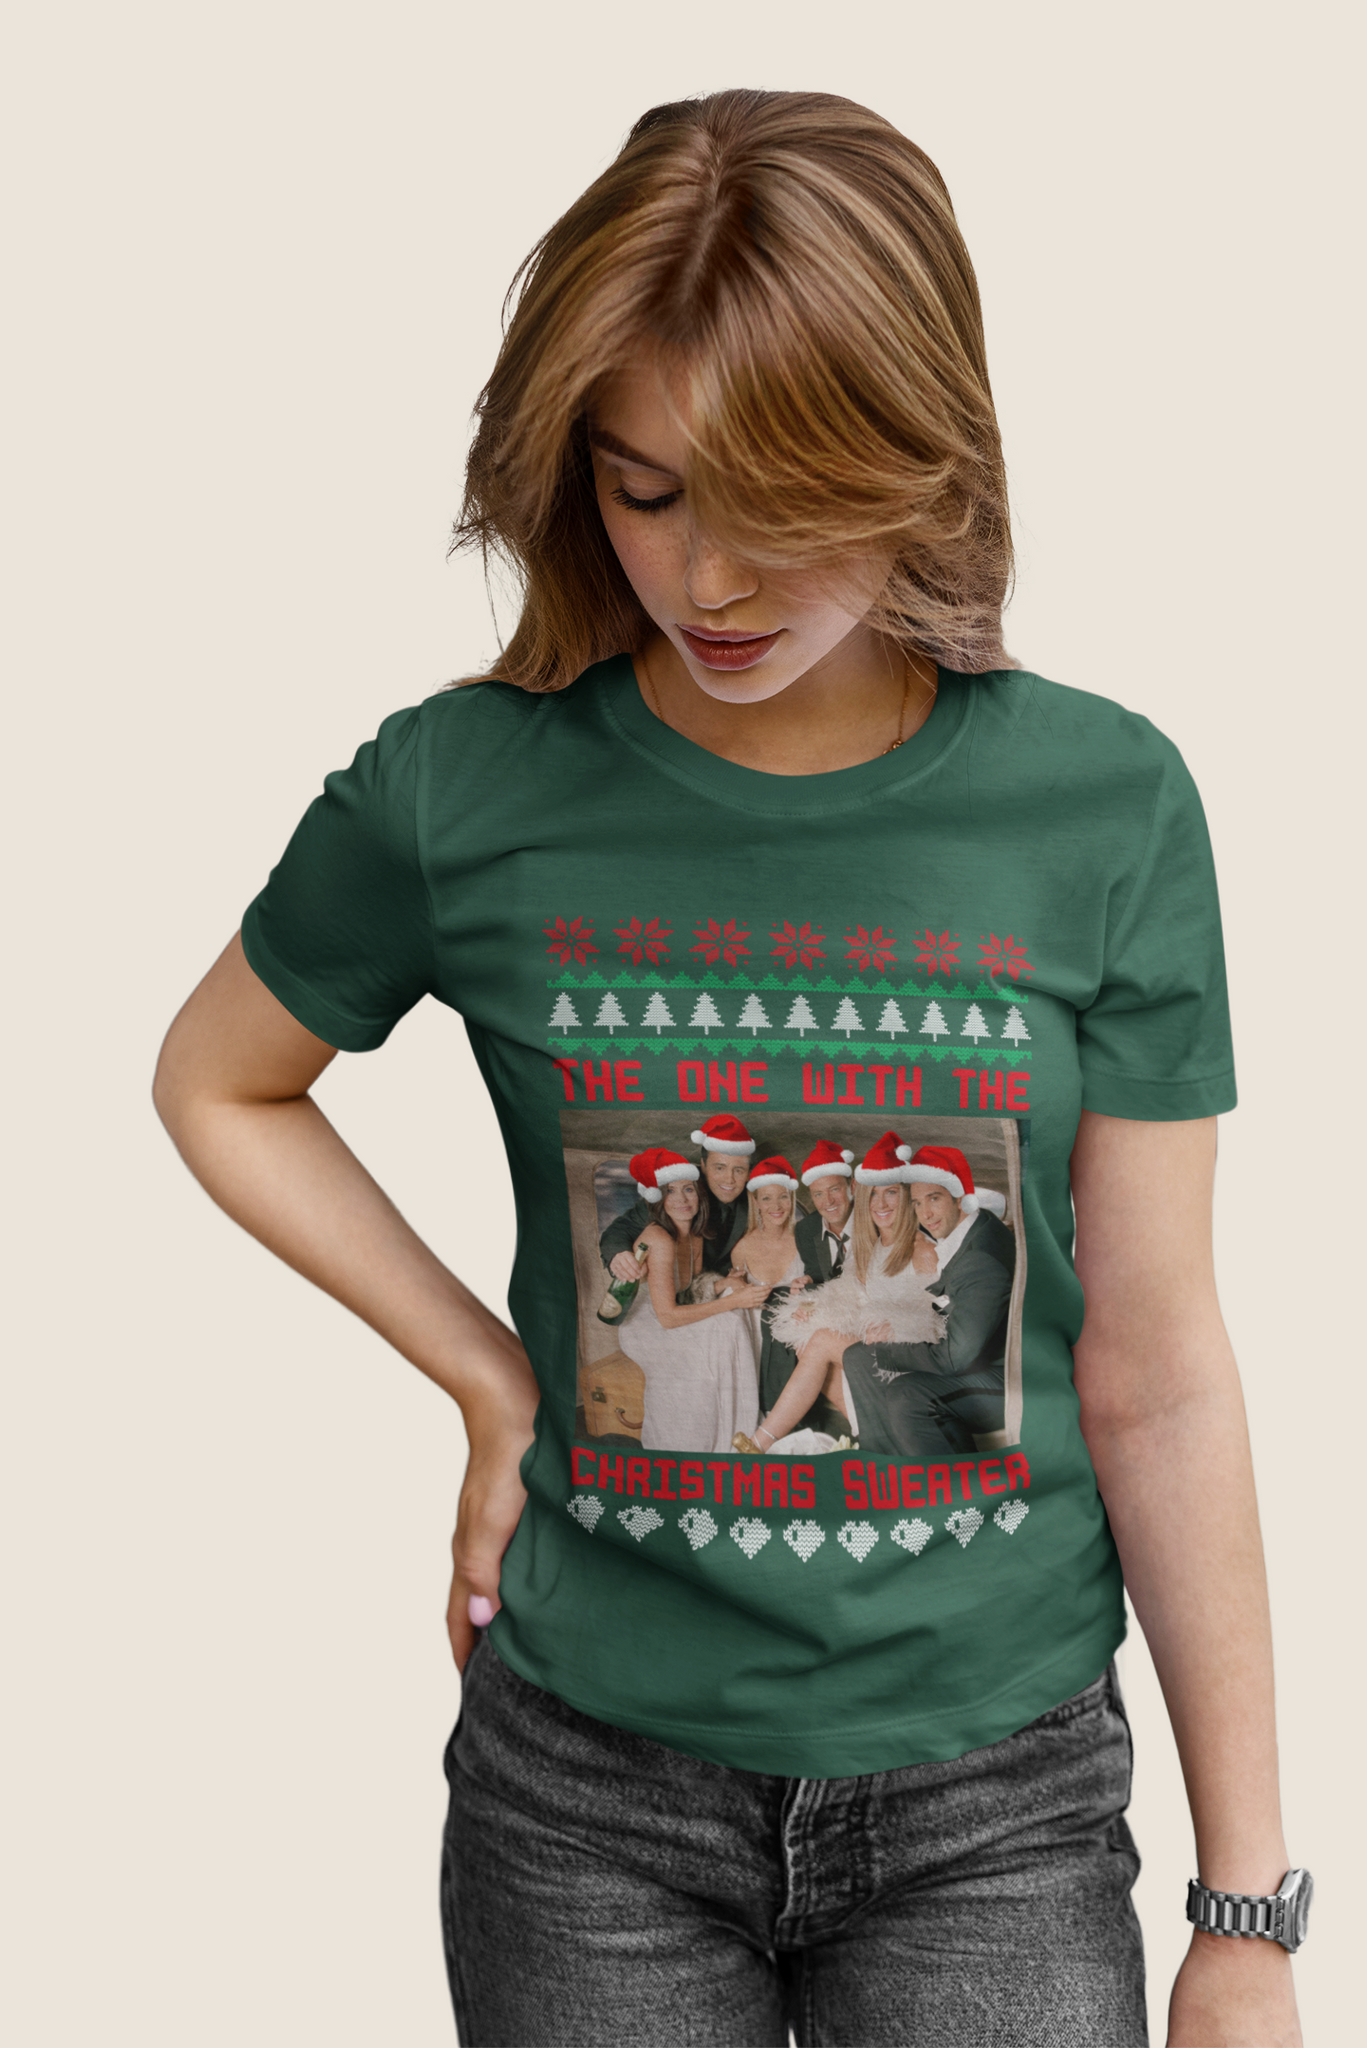 Friends TV Show Ugly Sweater T Shirt, Friends Characters T Shirt, The One With The Christmas Sweater Tshirt, Christmas Gifts